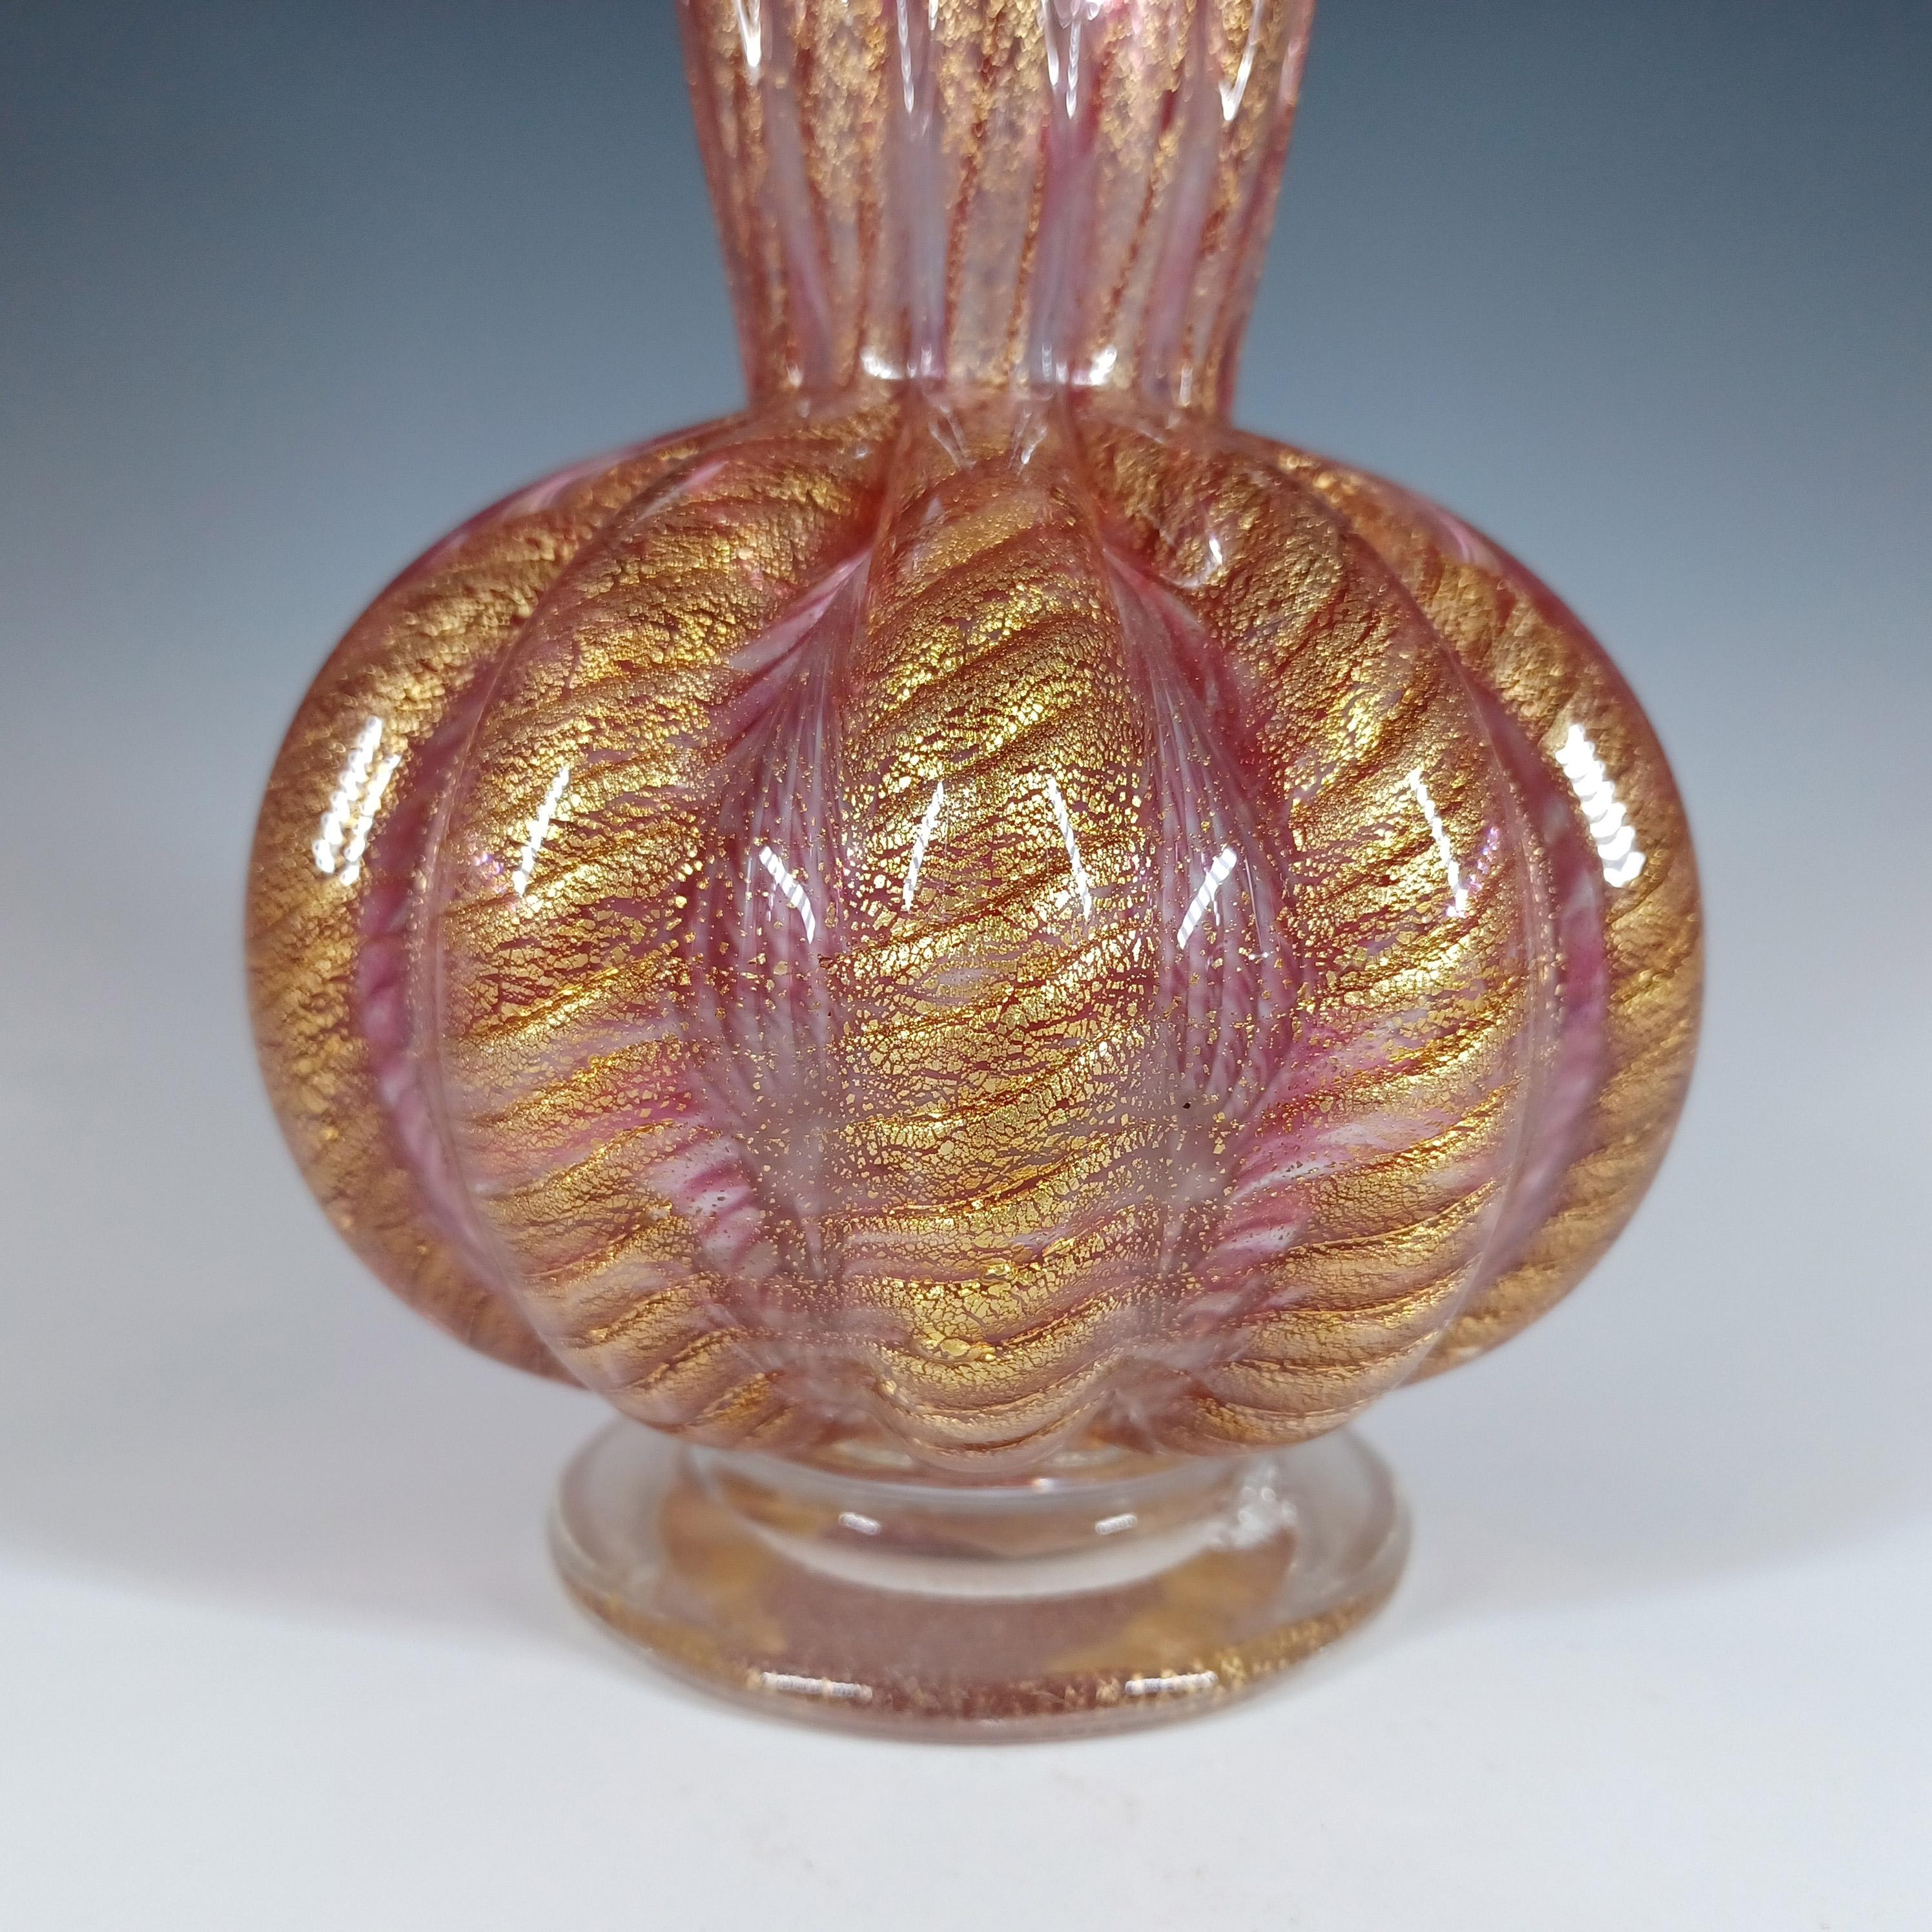 Here is a wonderful large 1950/60's Venetian glass vase, made on the island of Murano, near Venice, Italy. This piece was made by Barovier & Toso, part of the Cordonato d'Oro range.

Very similar pieces can be seen in the book 'Italian Glass' by